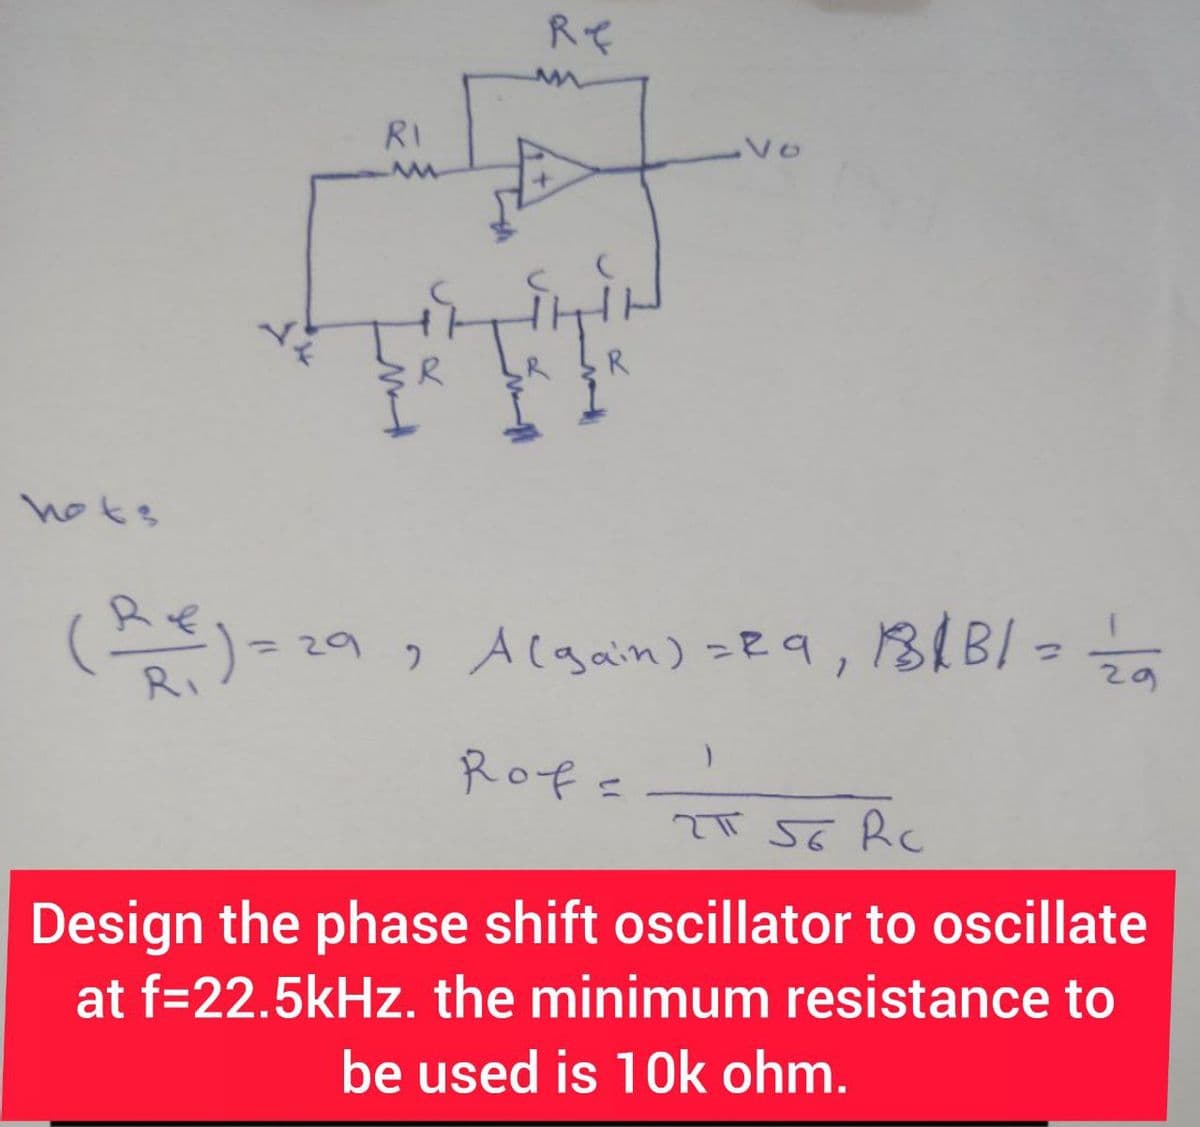 hots
RI
Re
R
Vo
(Re) = 29, A (gain) = 29, 181B/= 12/0
Rof=
2T 56 Rc
Design the phase shift oscillator to oscillate
at f=22.5kHz. the minimum resistance to
be used is 10k ohm.